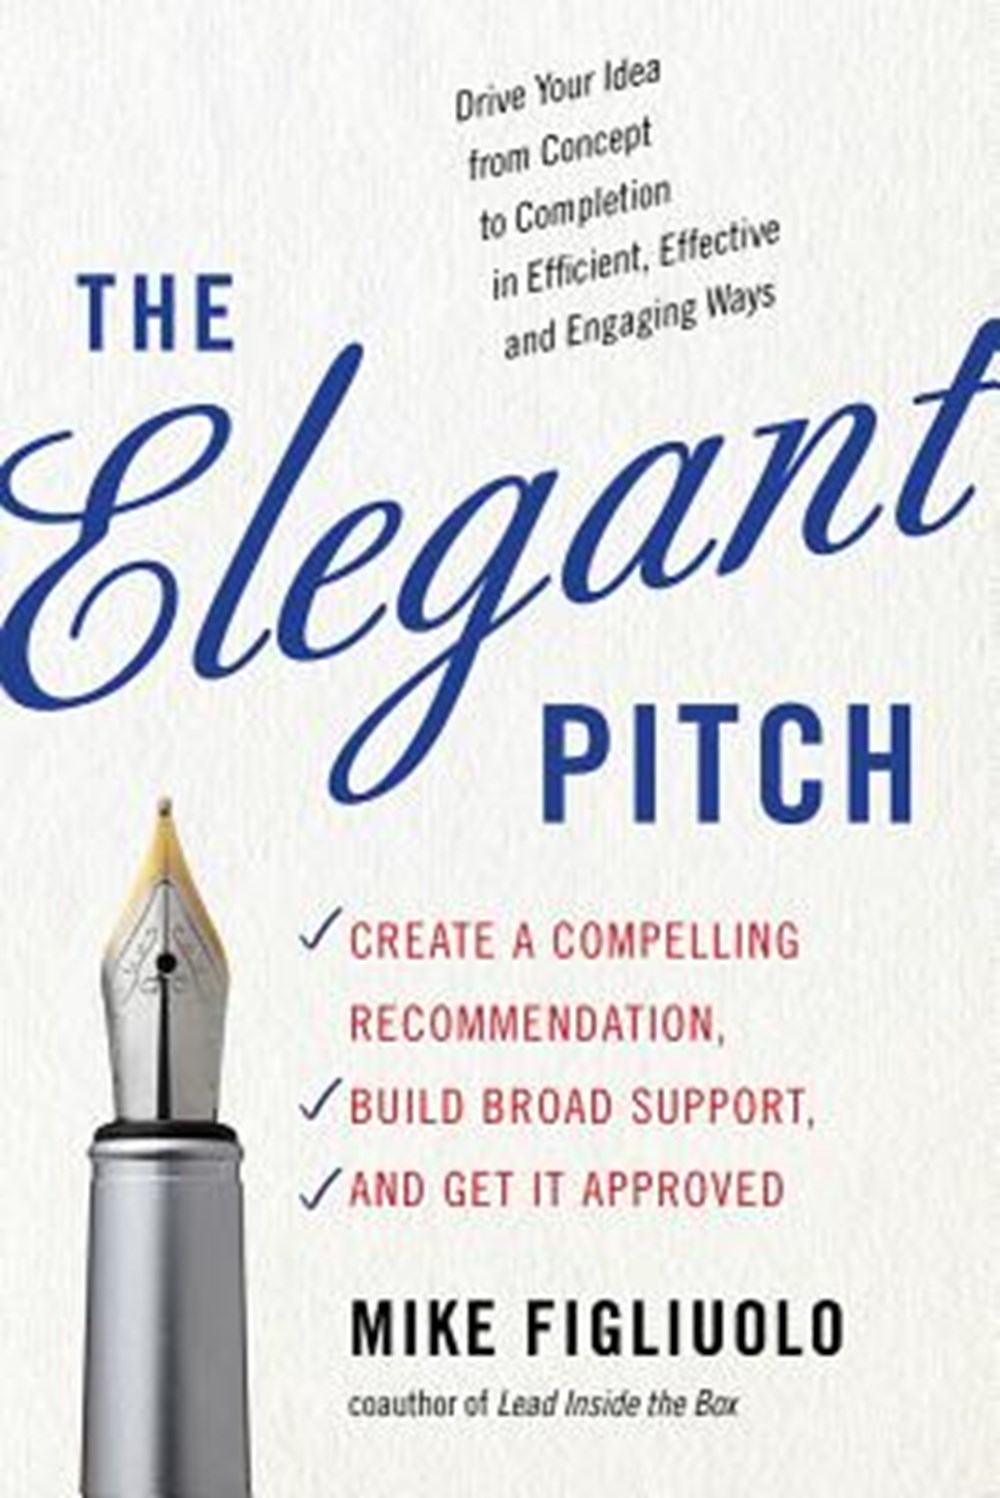 Elegant Pitch Create a Compelling Recommendation, Build Broad Support, and Get It Approved